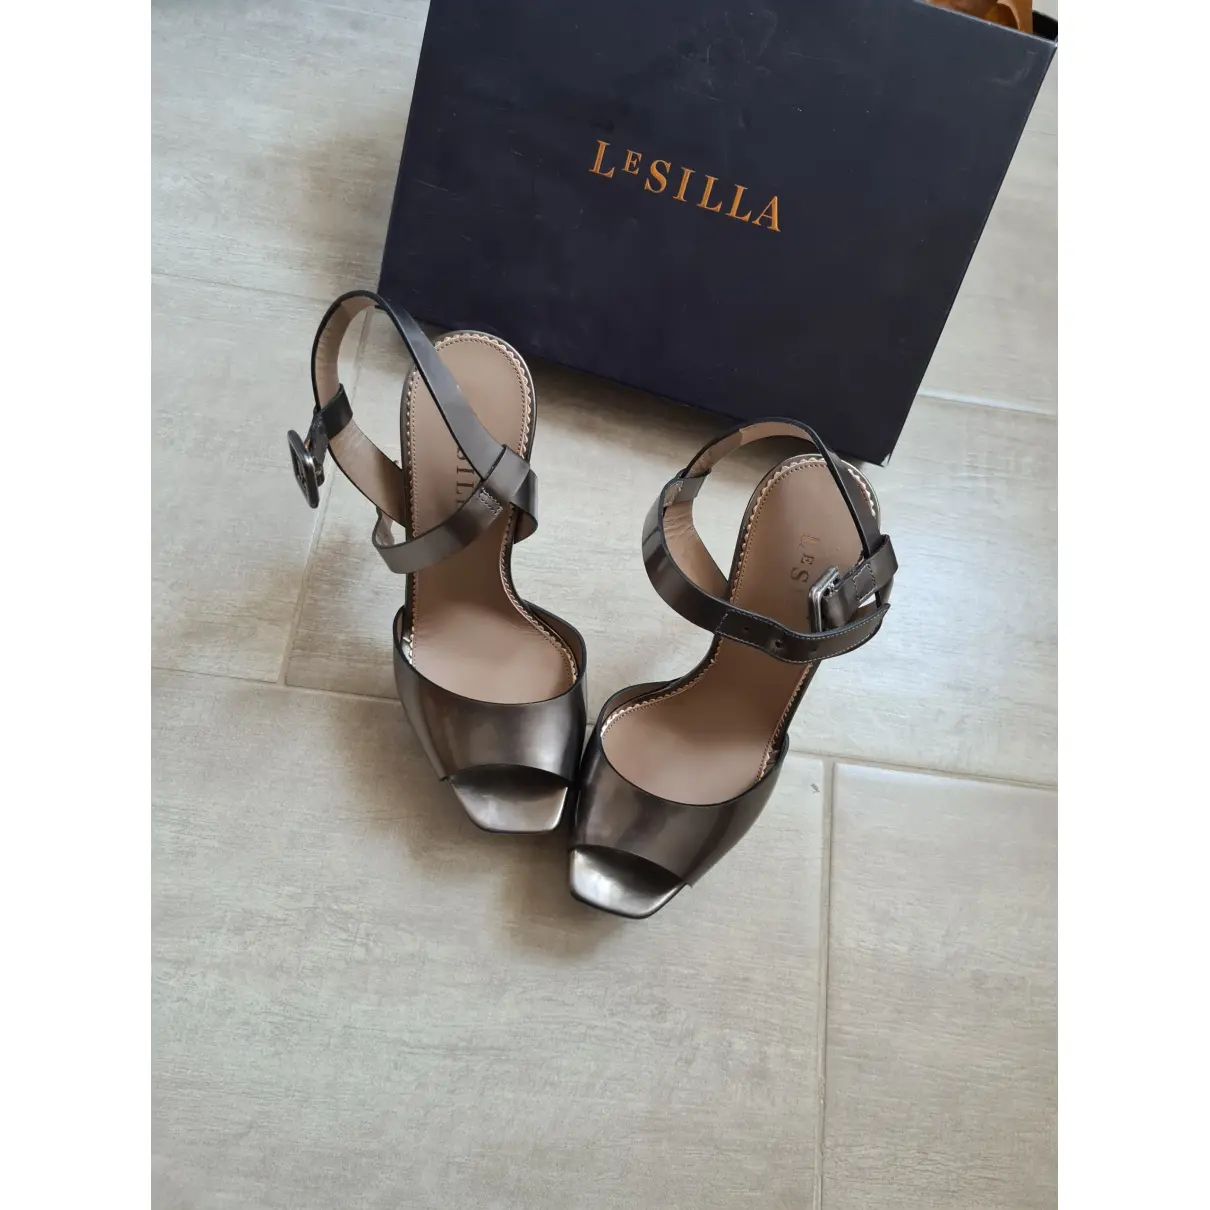 Buy Le Silla Leather sandals online